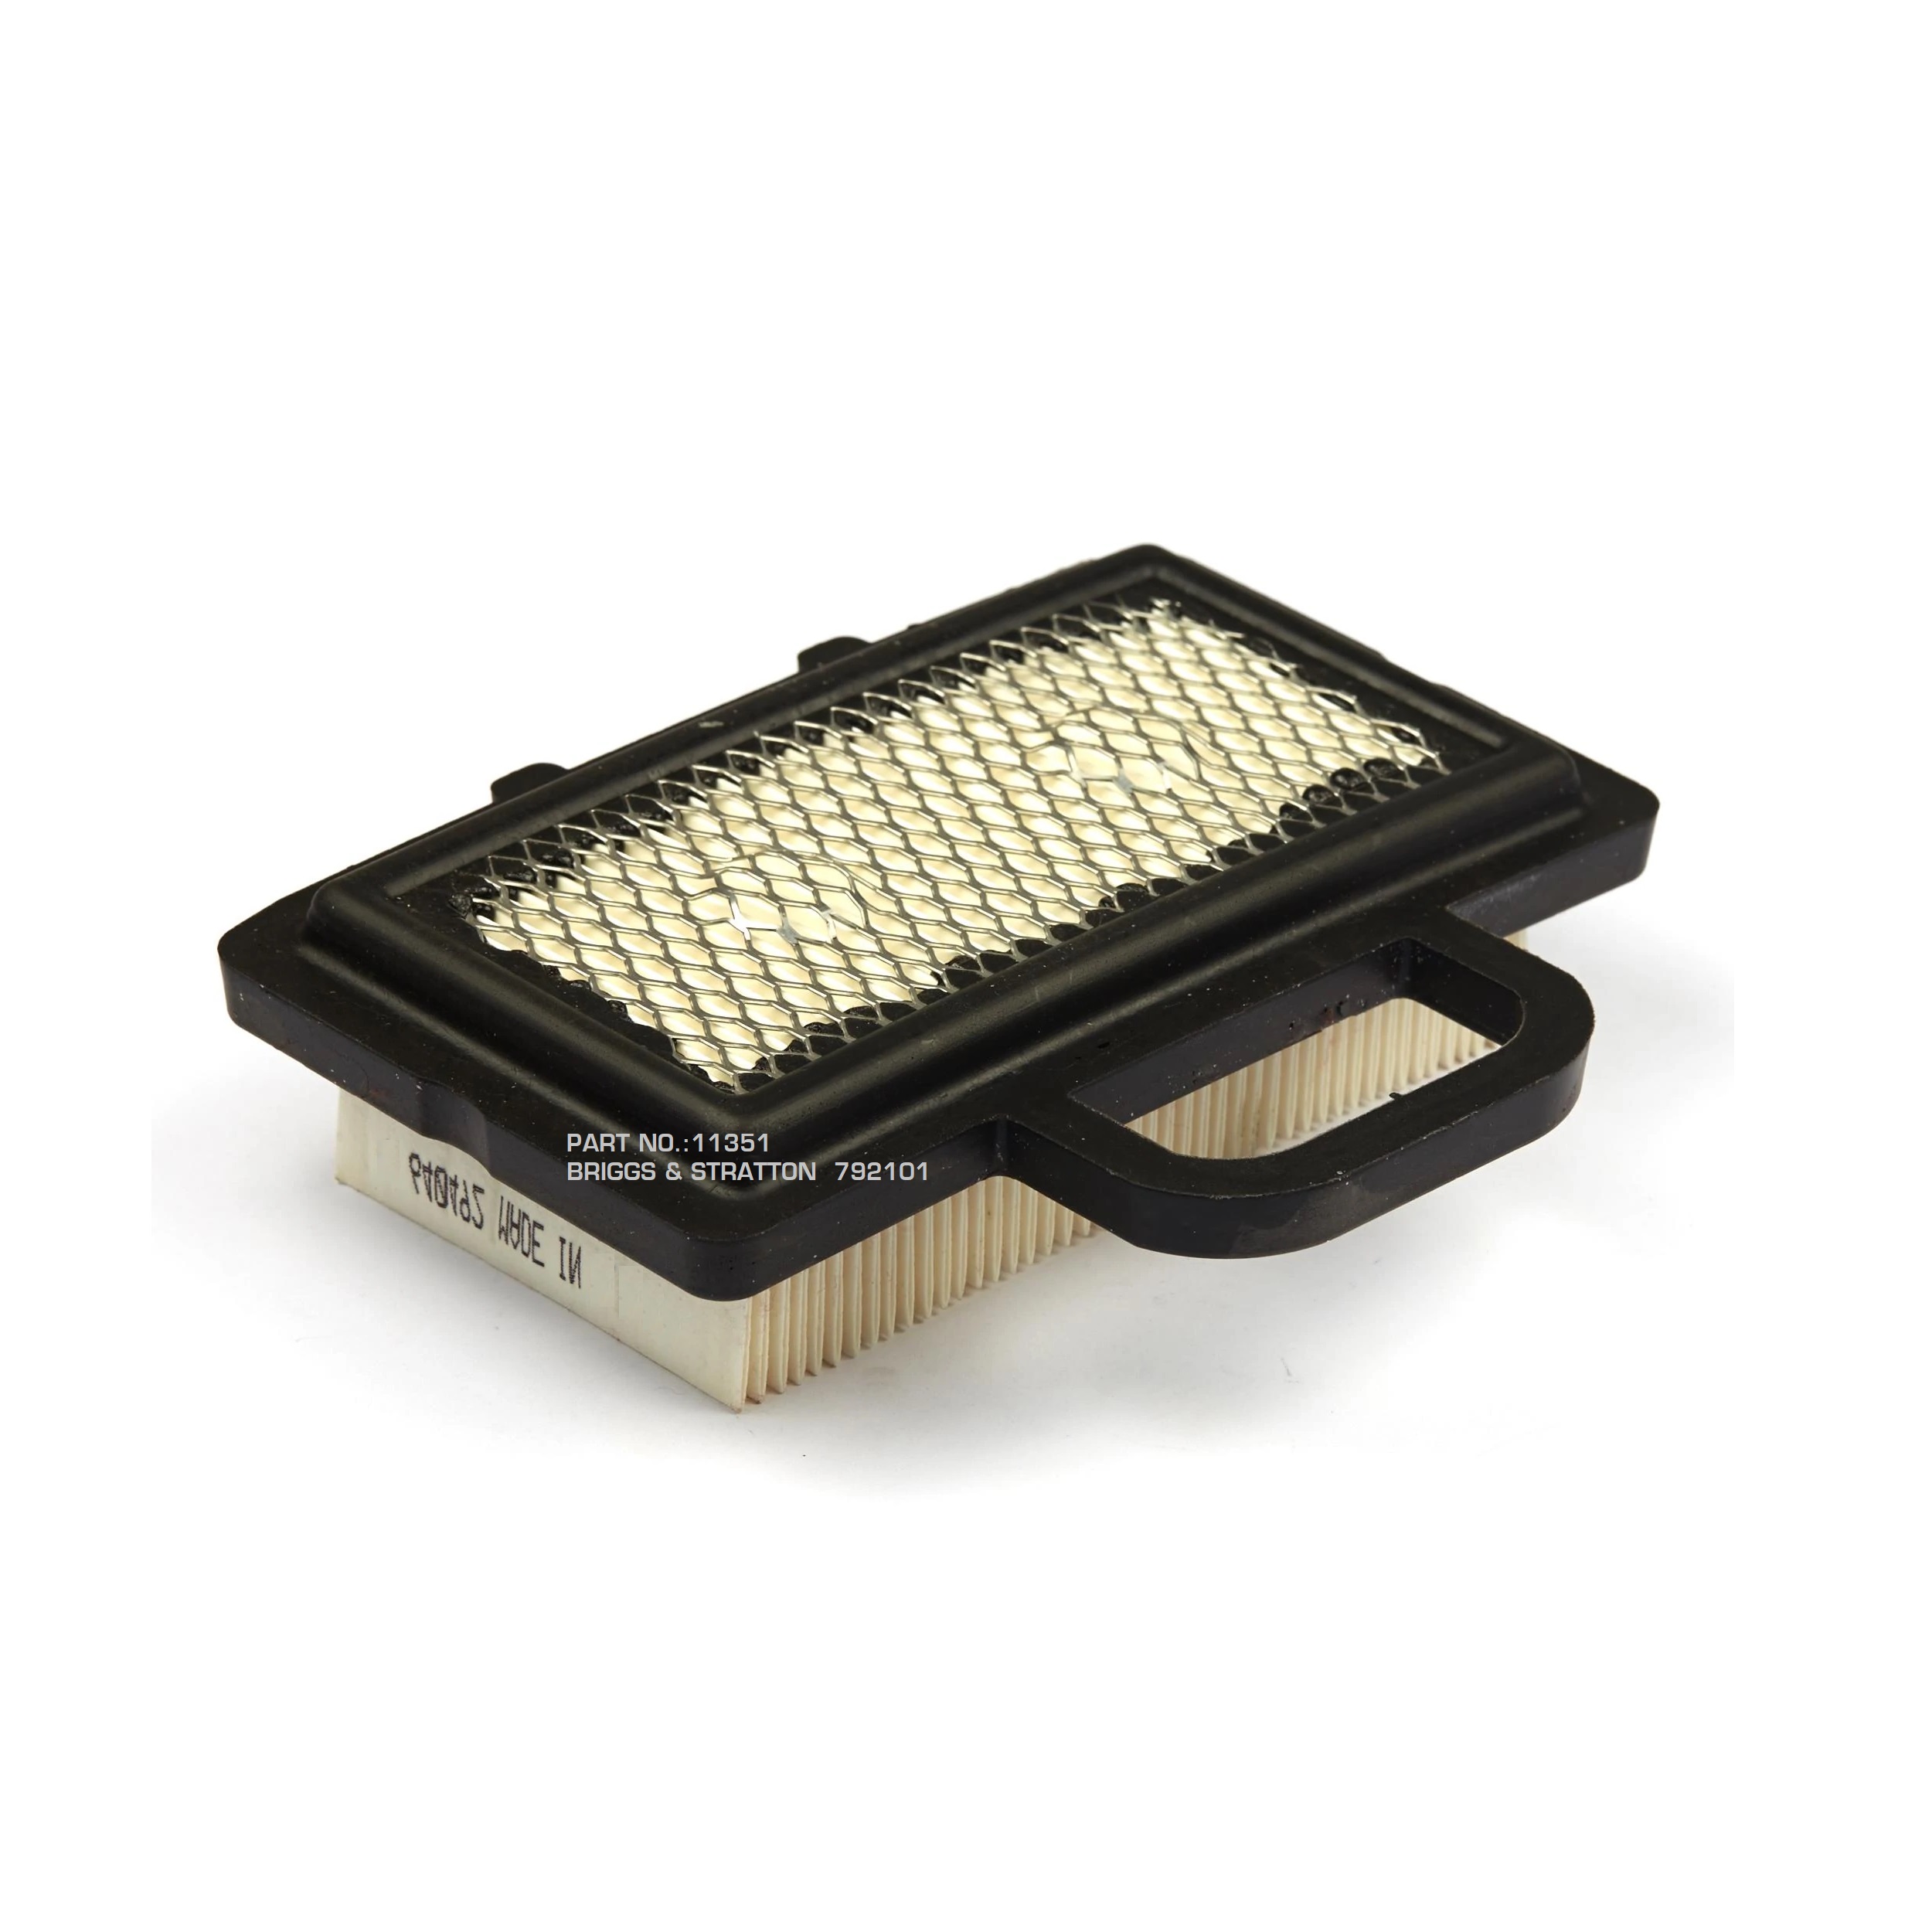 11351 AIR FILTER FOR BRIGGS&STRATTON